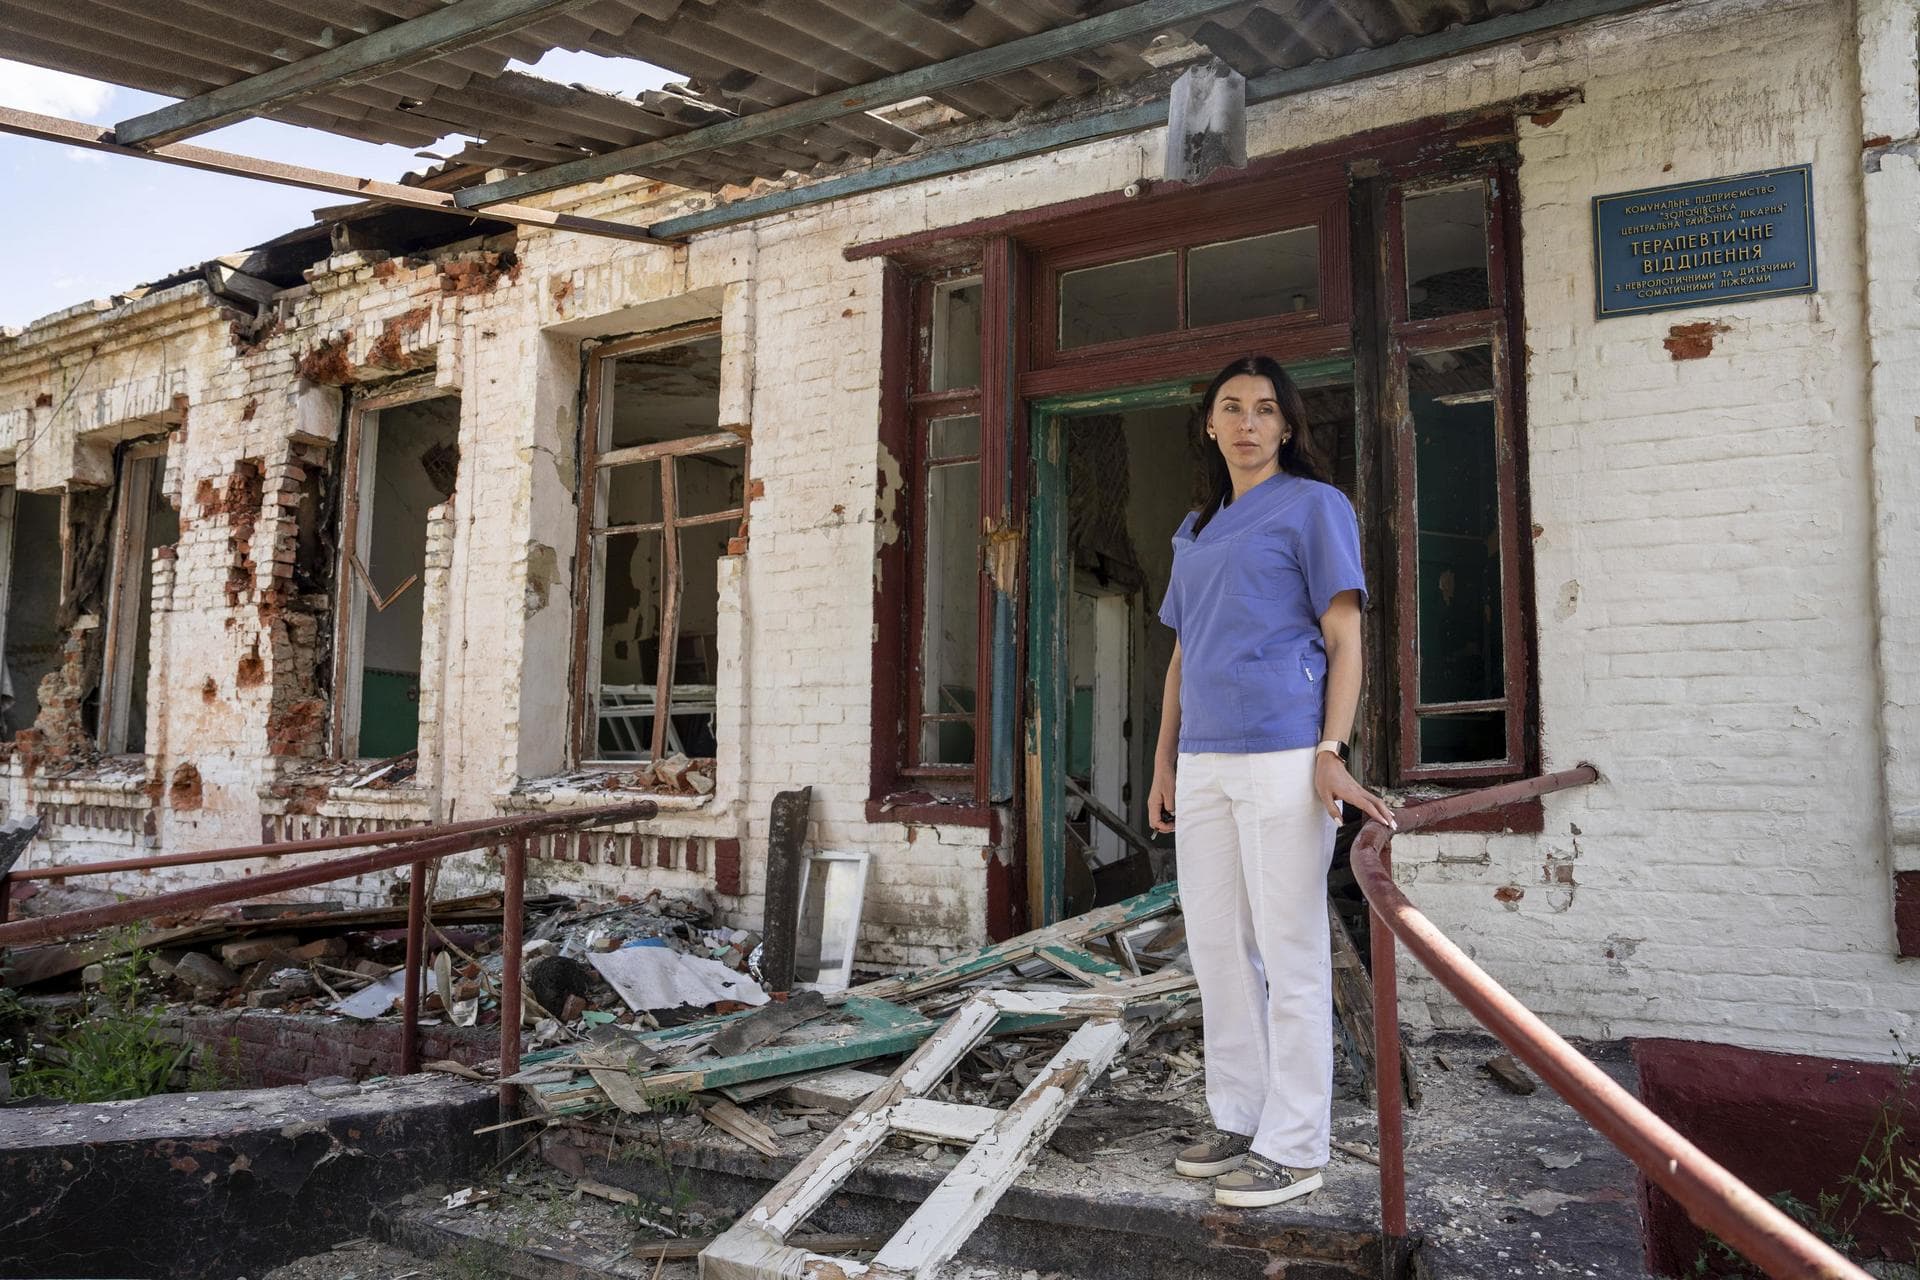 Dr. Ilona Butova stands in front of the therapy department which was destroyed after a Russia attack on the hospital in Zolochiv, Kharkiv region